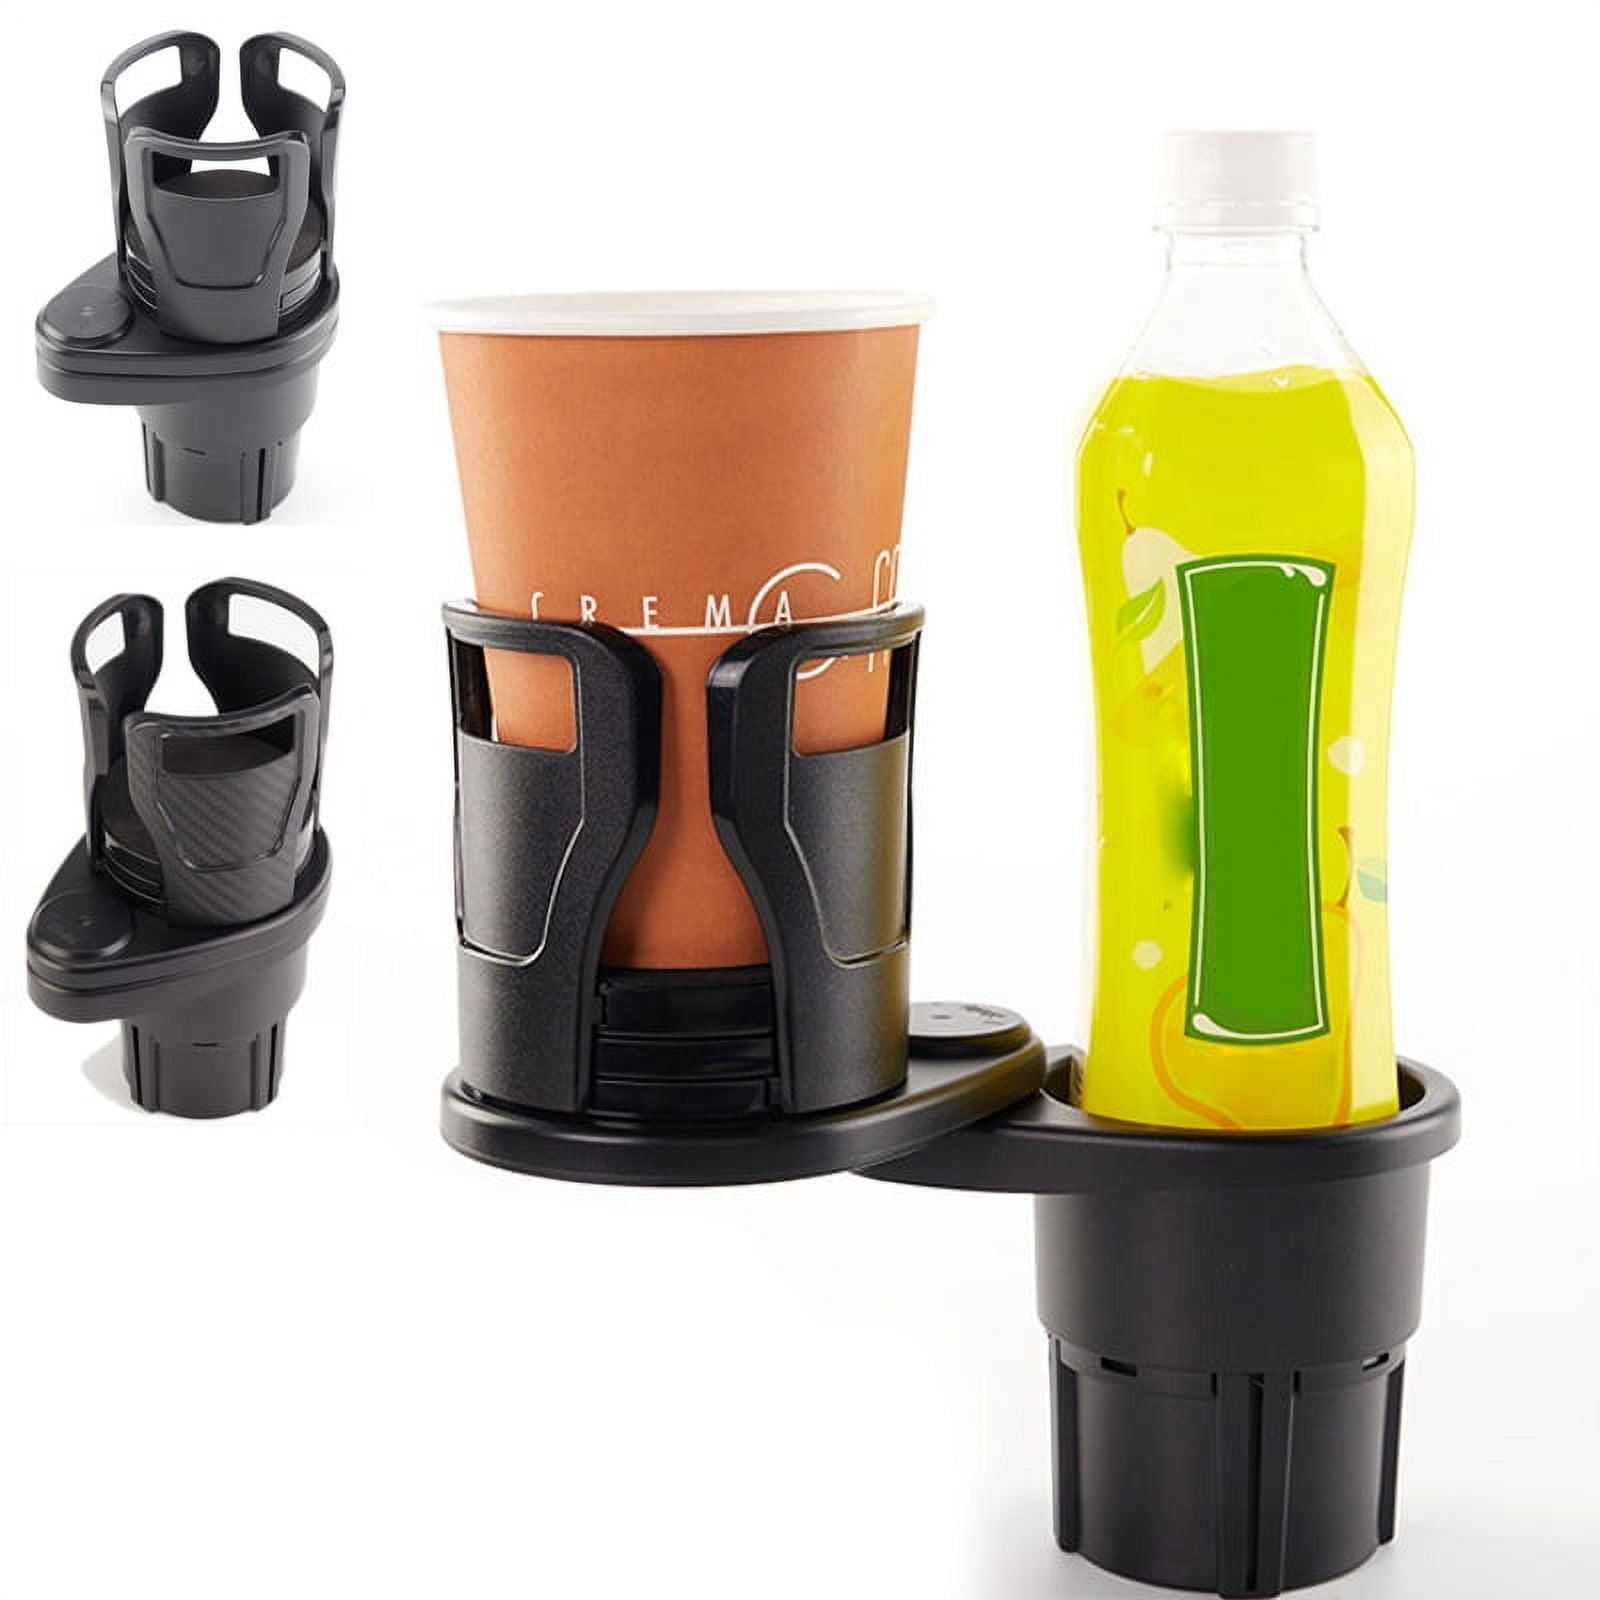 Car Cup Holder Expander, 2 in 1 Multifunctional Auto Drinks Holder, Double Cup  Holder Extender Adapter Organizer with 360° Rotating Adjustable Base to  Hold Most Water Bottles 